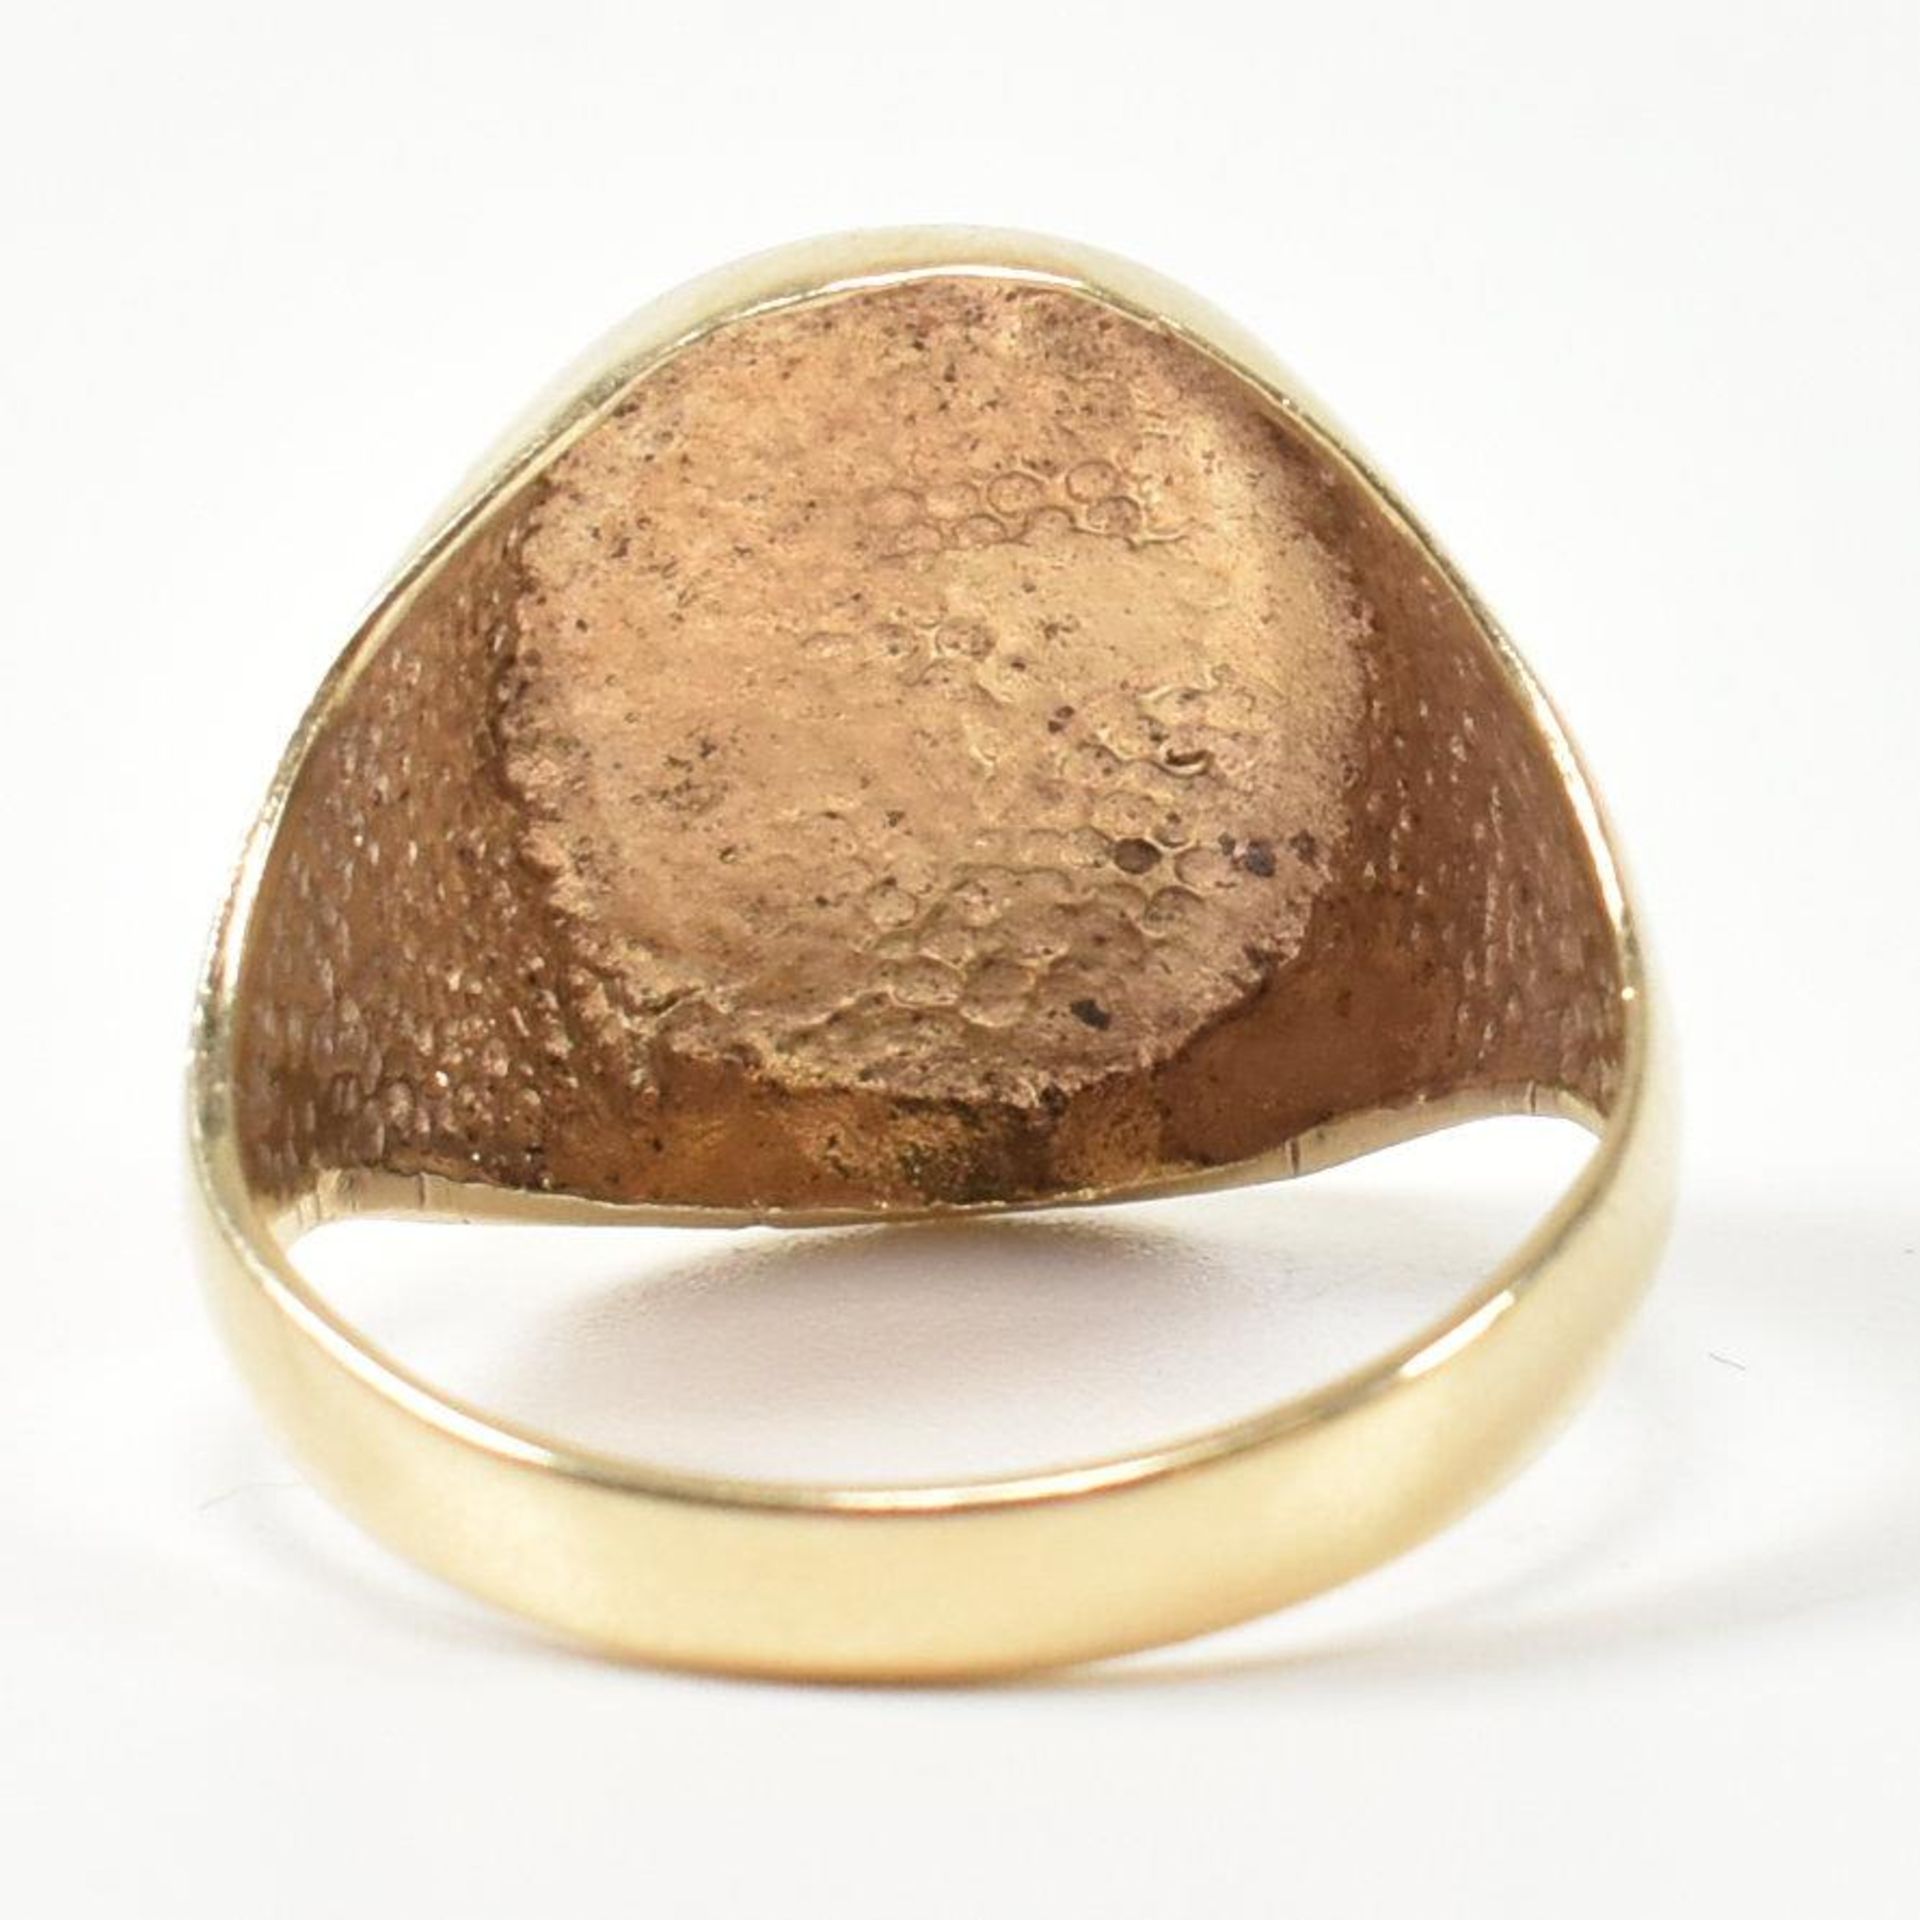 9CT GOLD OVAL SIGNET RING - Image 4 of 6